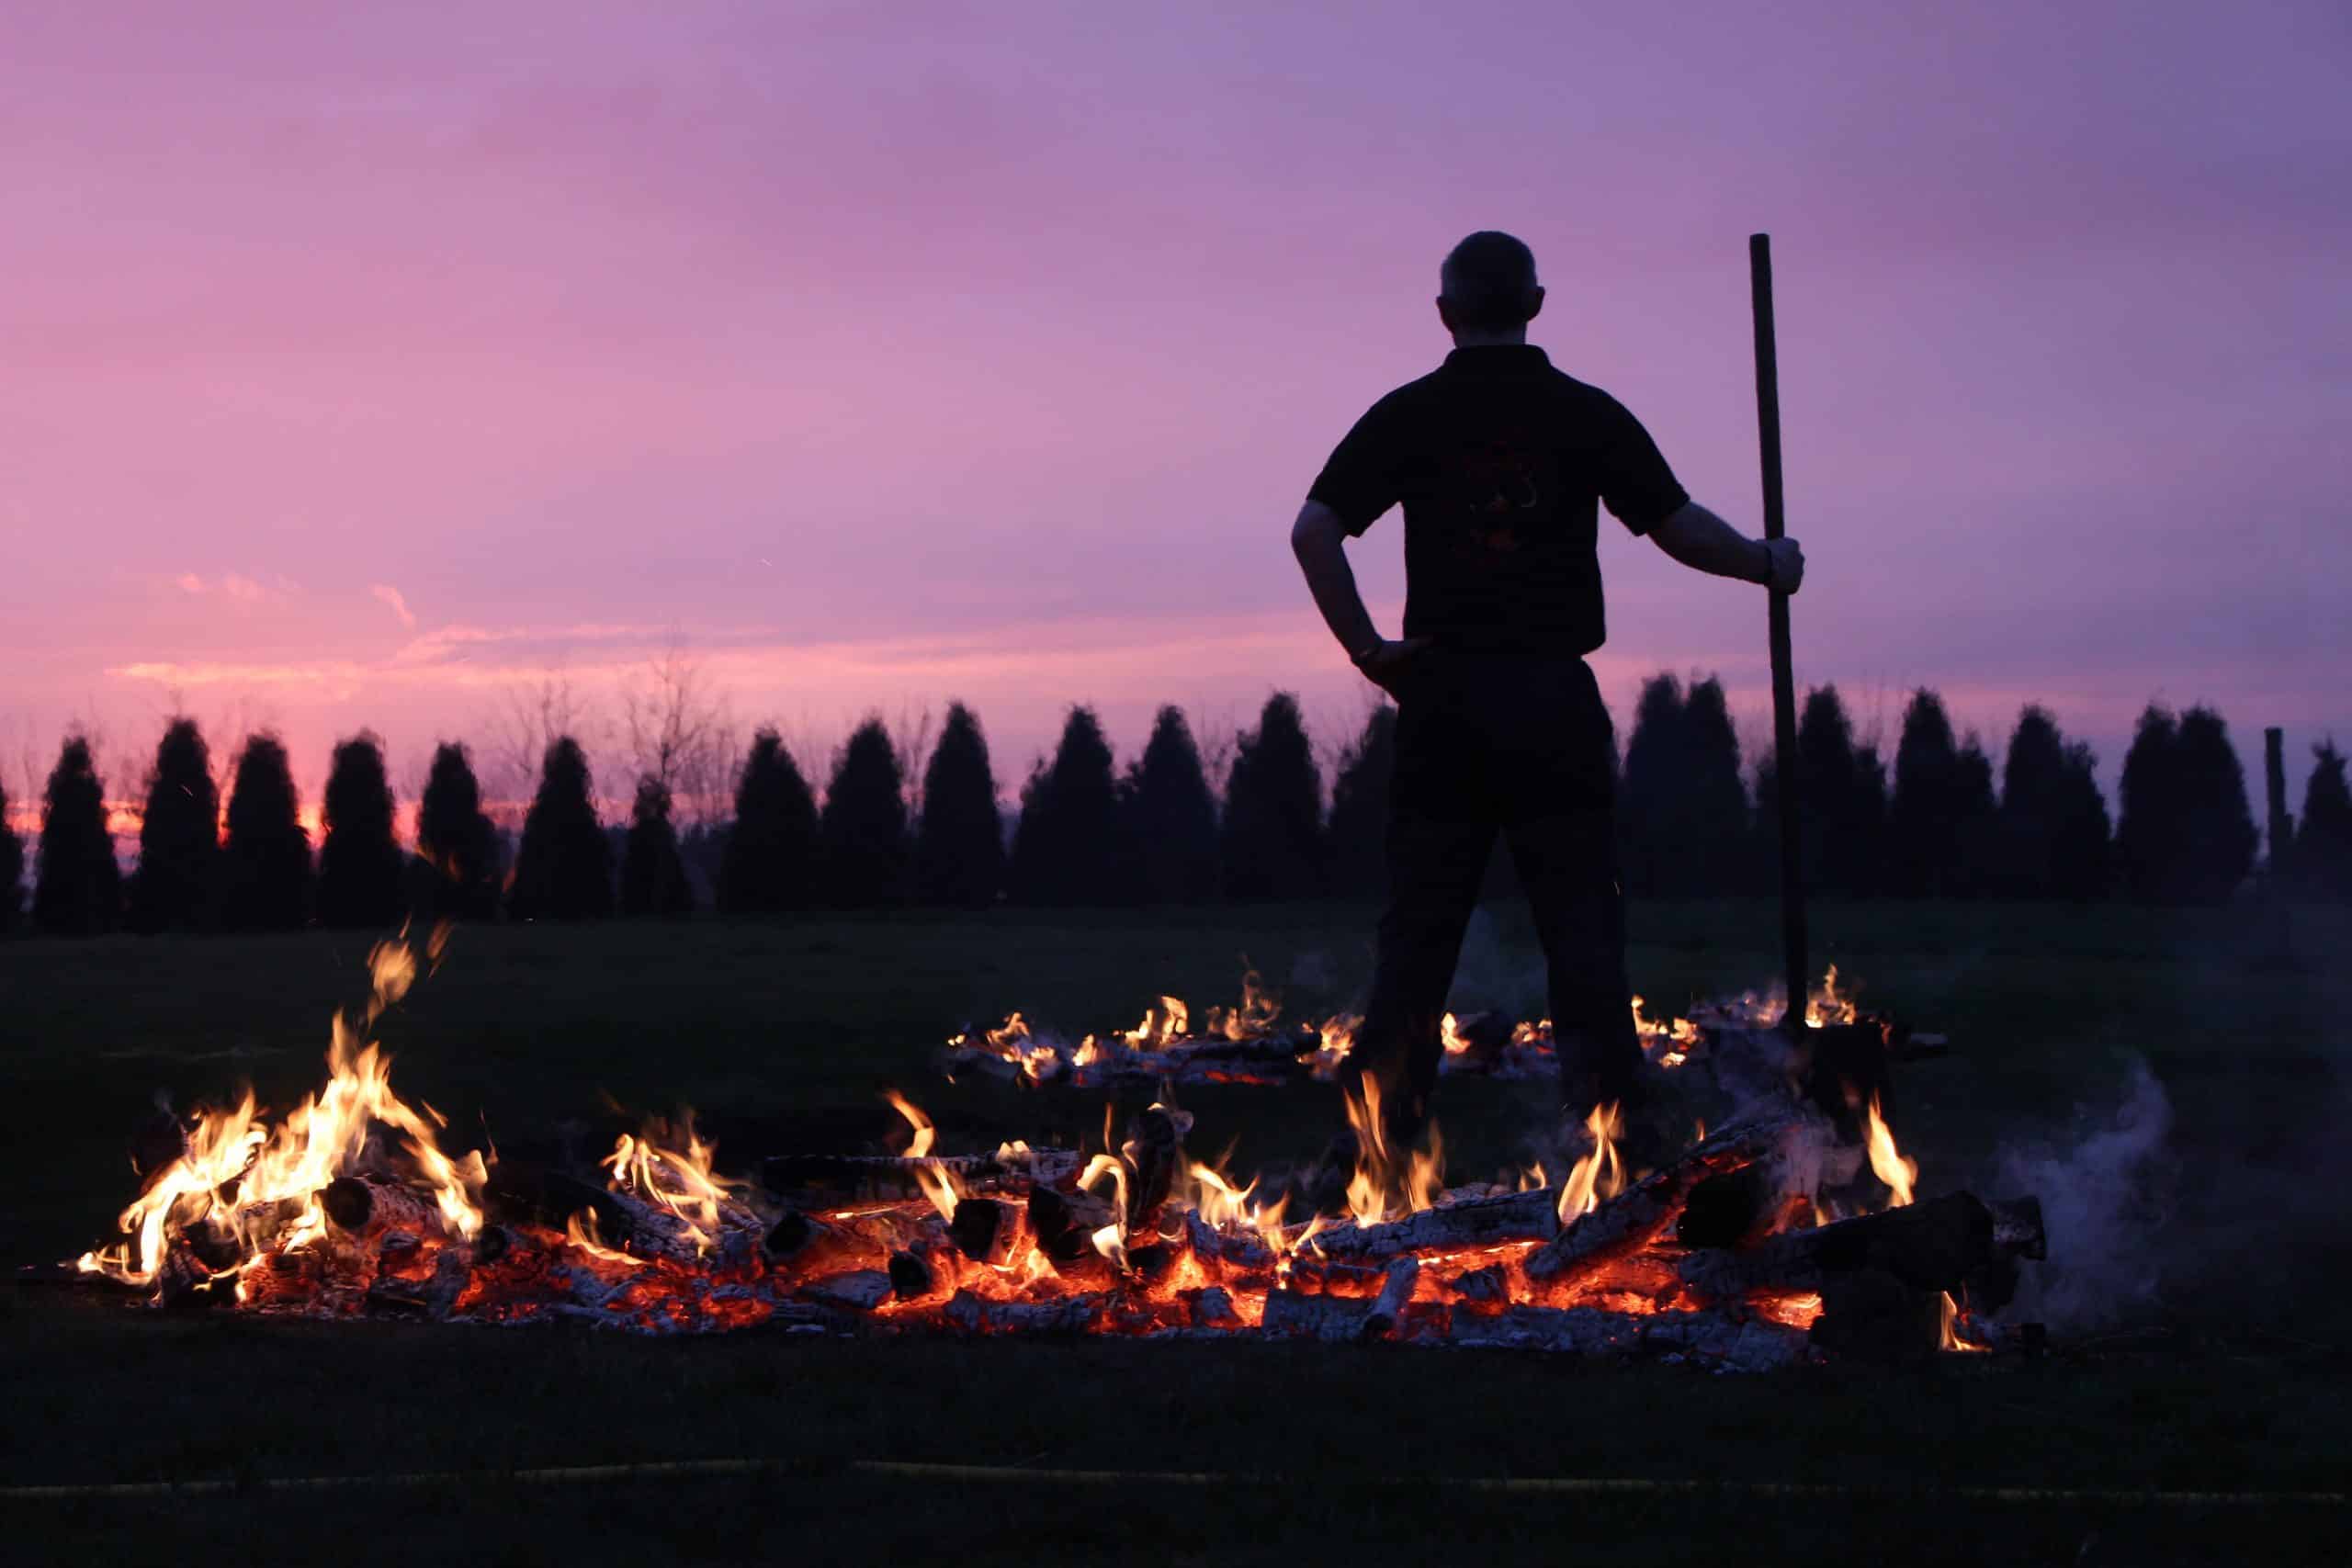 Silhouette against purple sky of man standing between two fires a holding handle of a tool